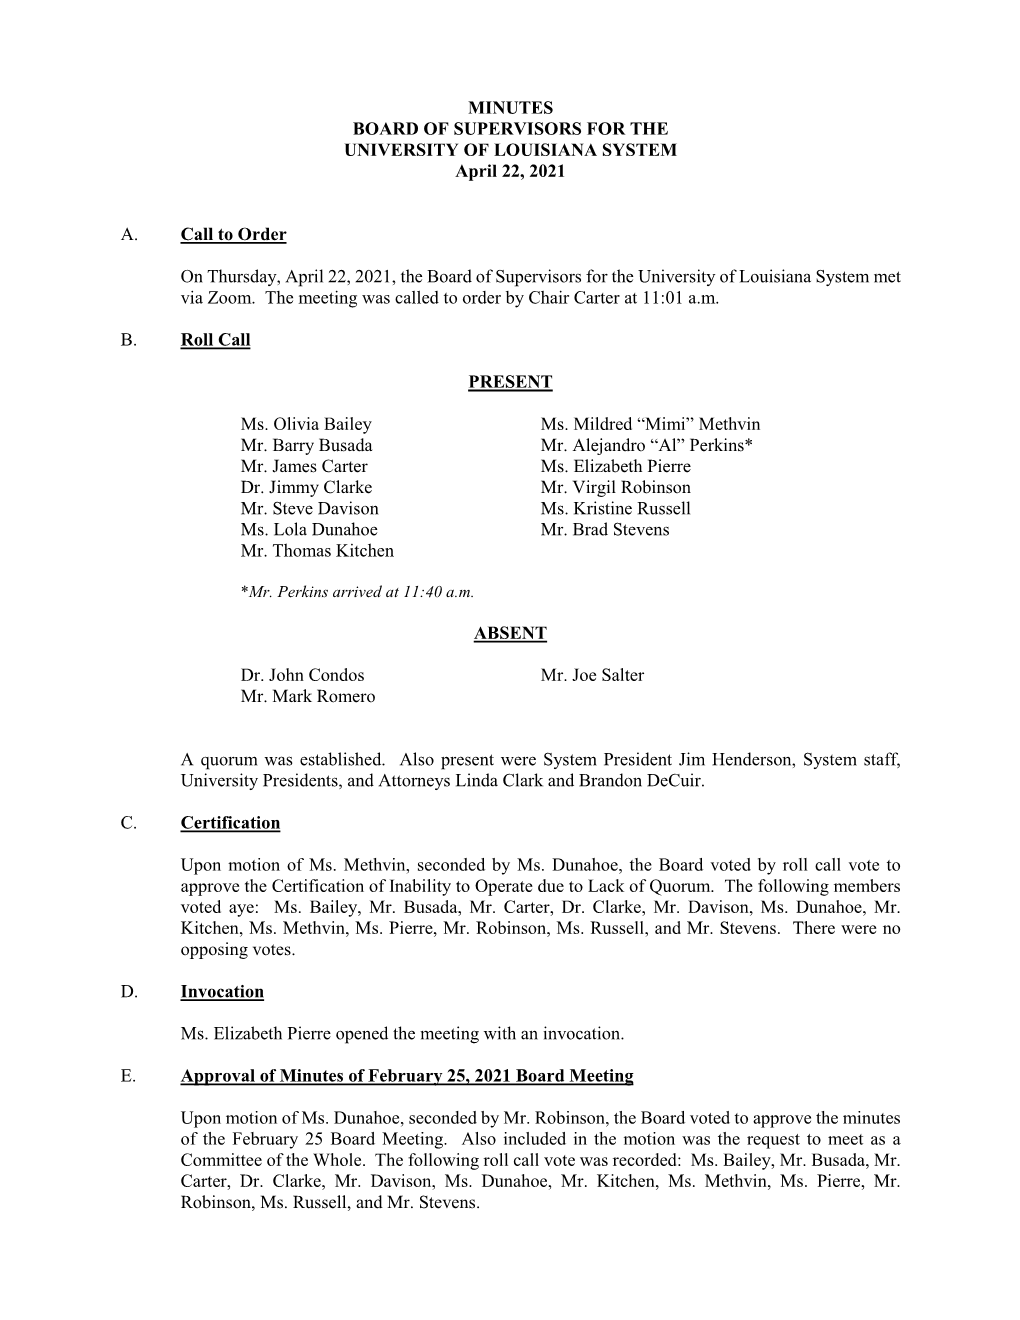 MINUTES BOARD of SUPERVISORS for the UNIVERSITY of LOUISIANA SYSTEM April 22, 2021